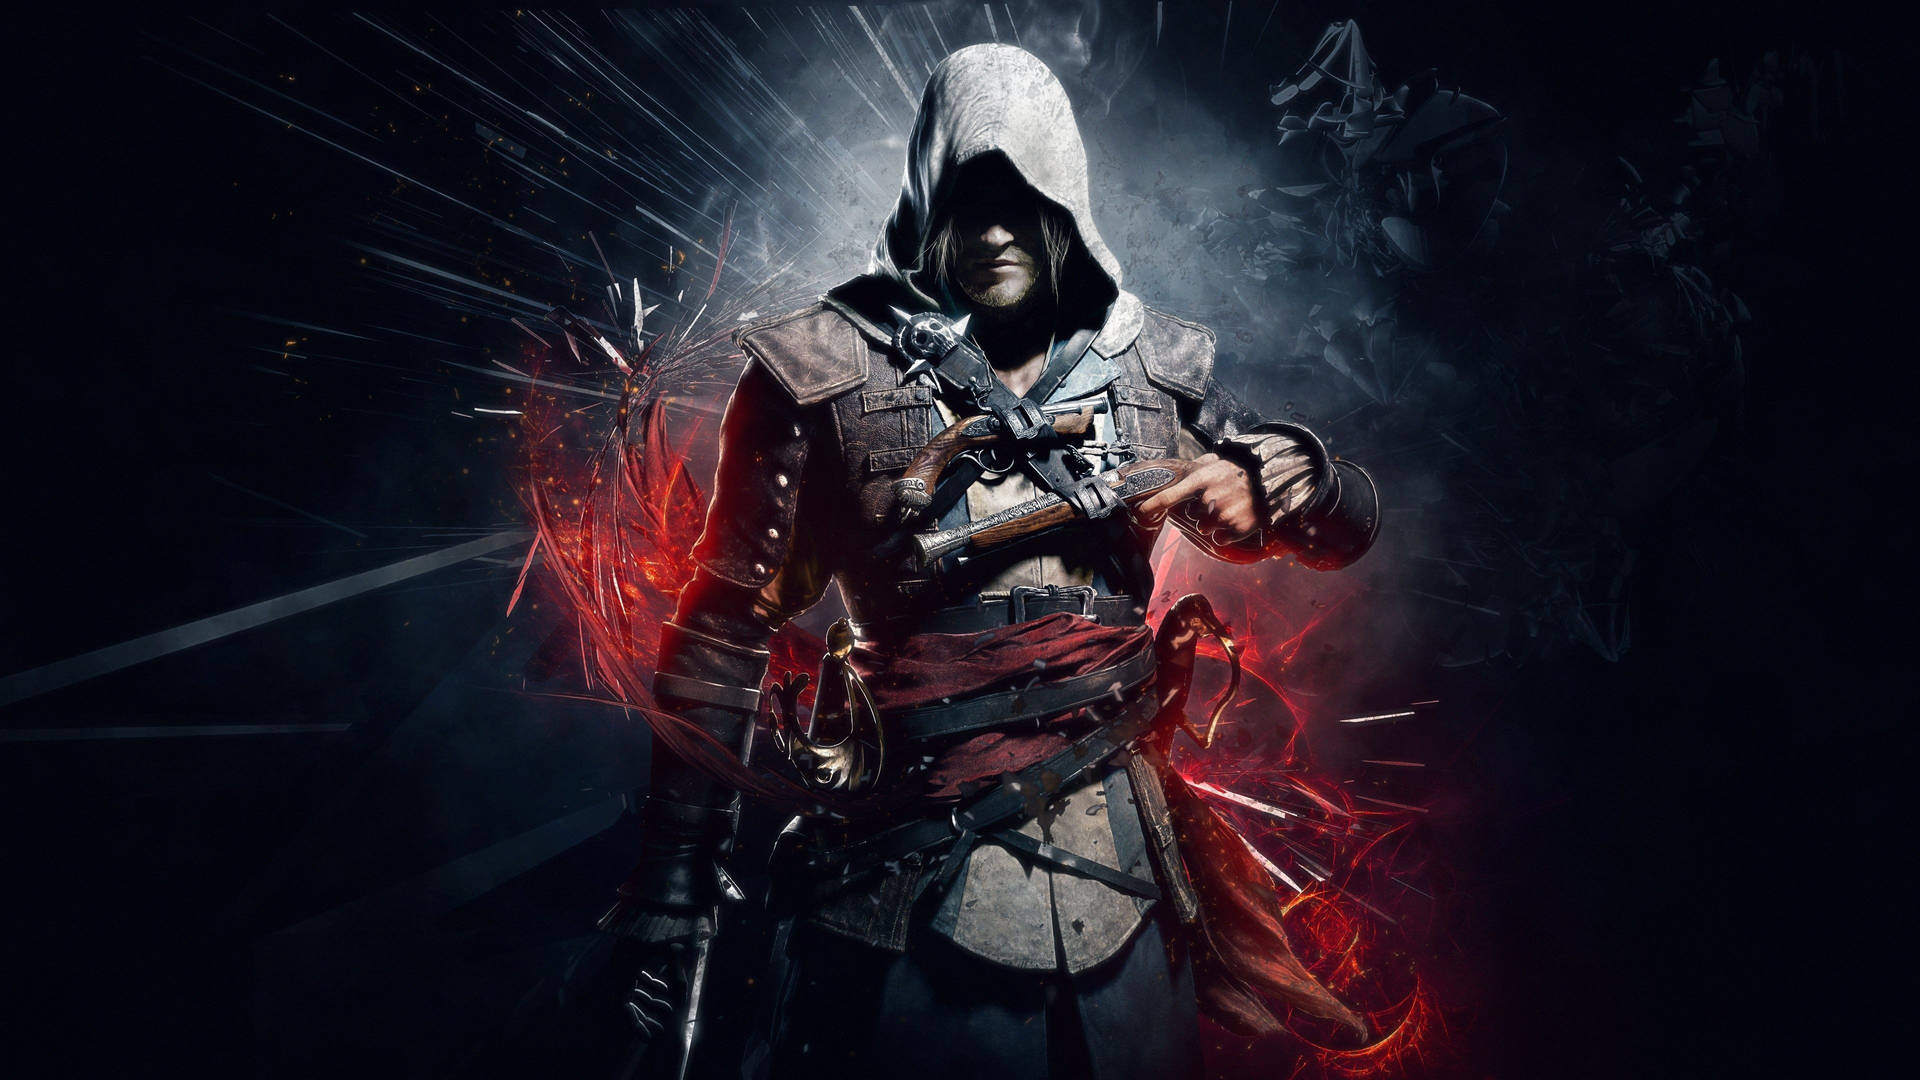 Cool Picture Of Assassins Creed Wallpaper